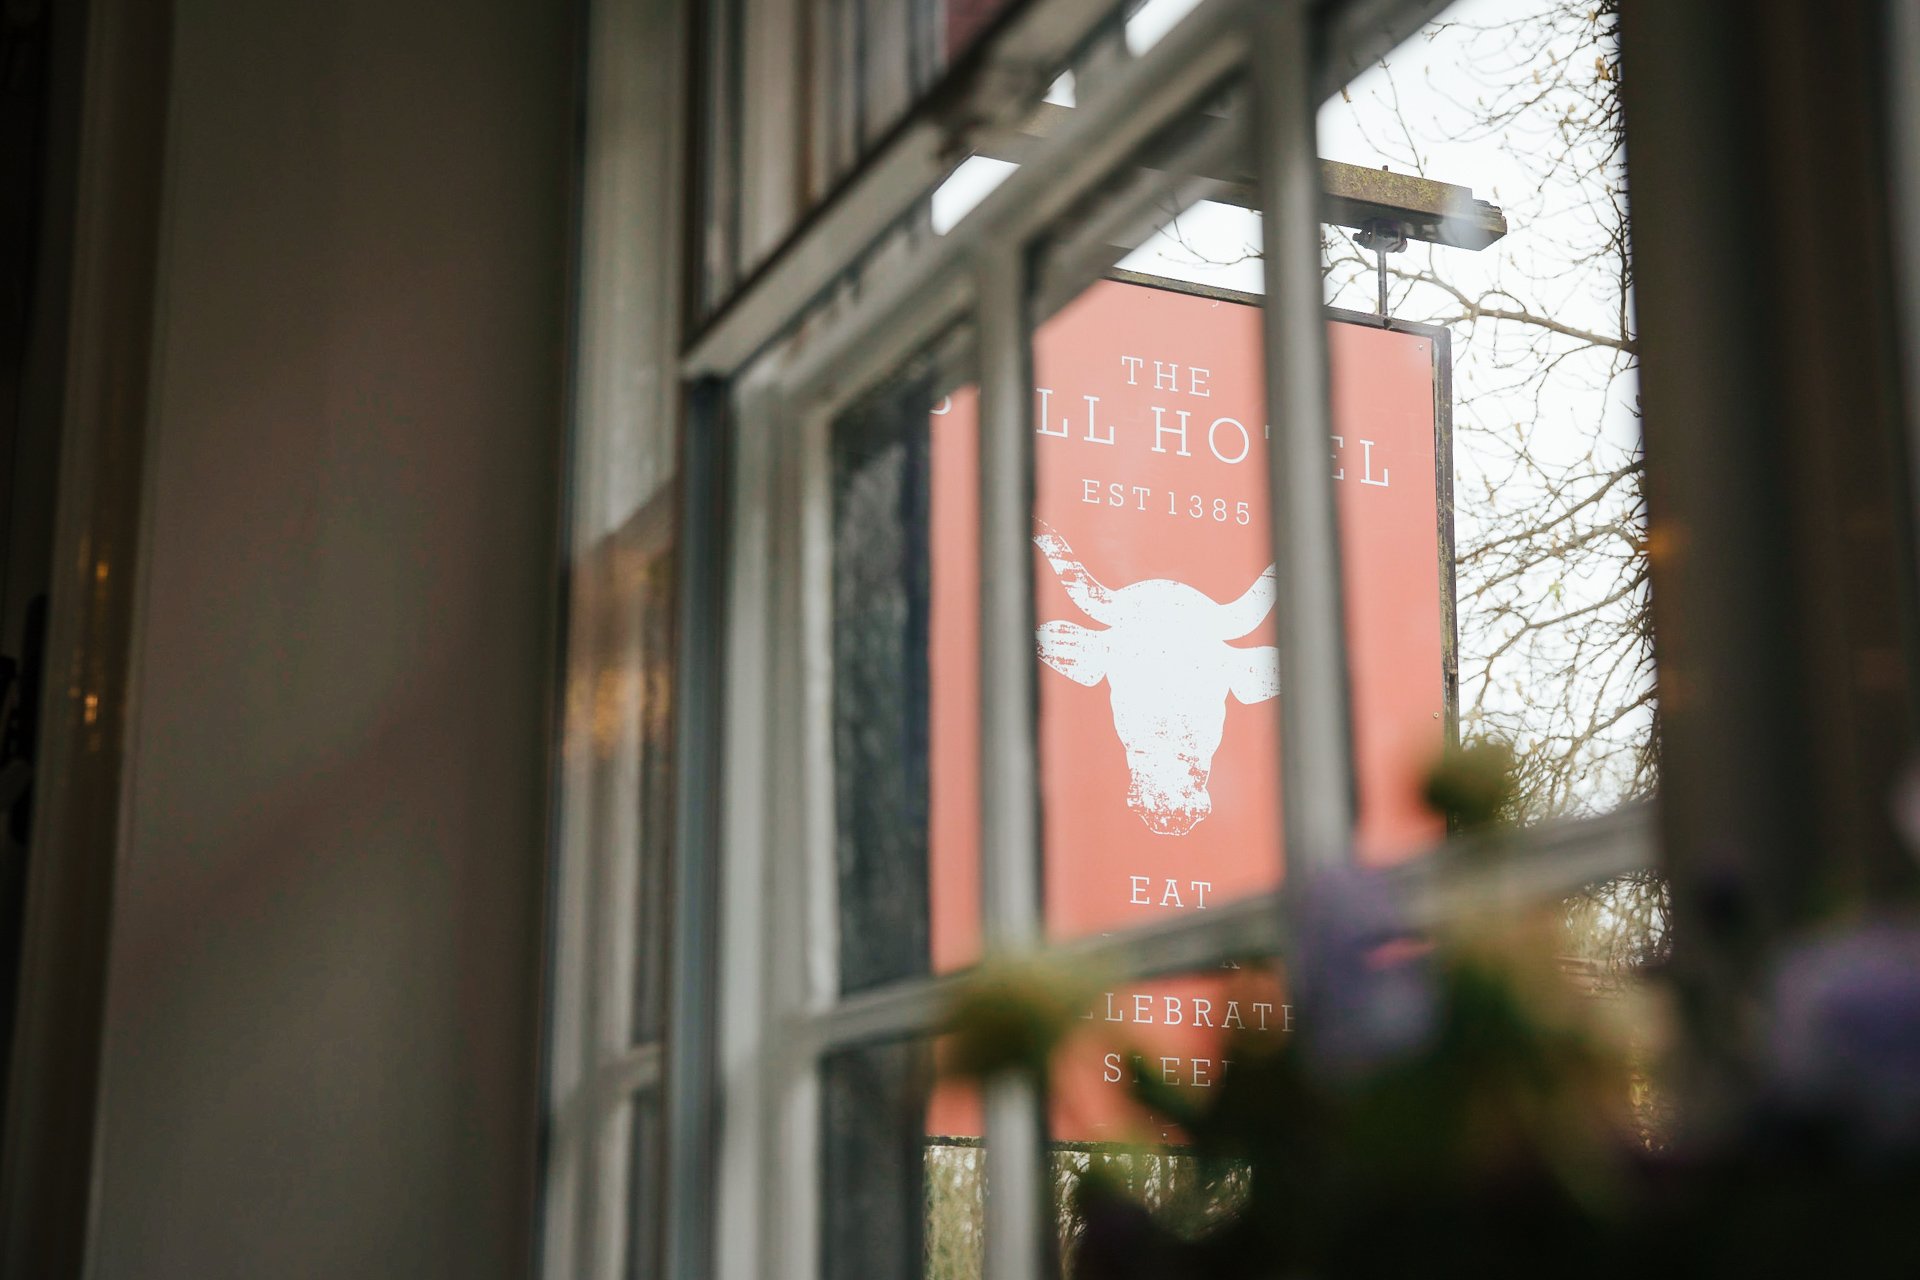 The sign of the The Bull Hotel Wrotham through their Bridal suite window